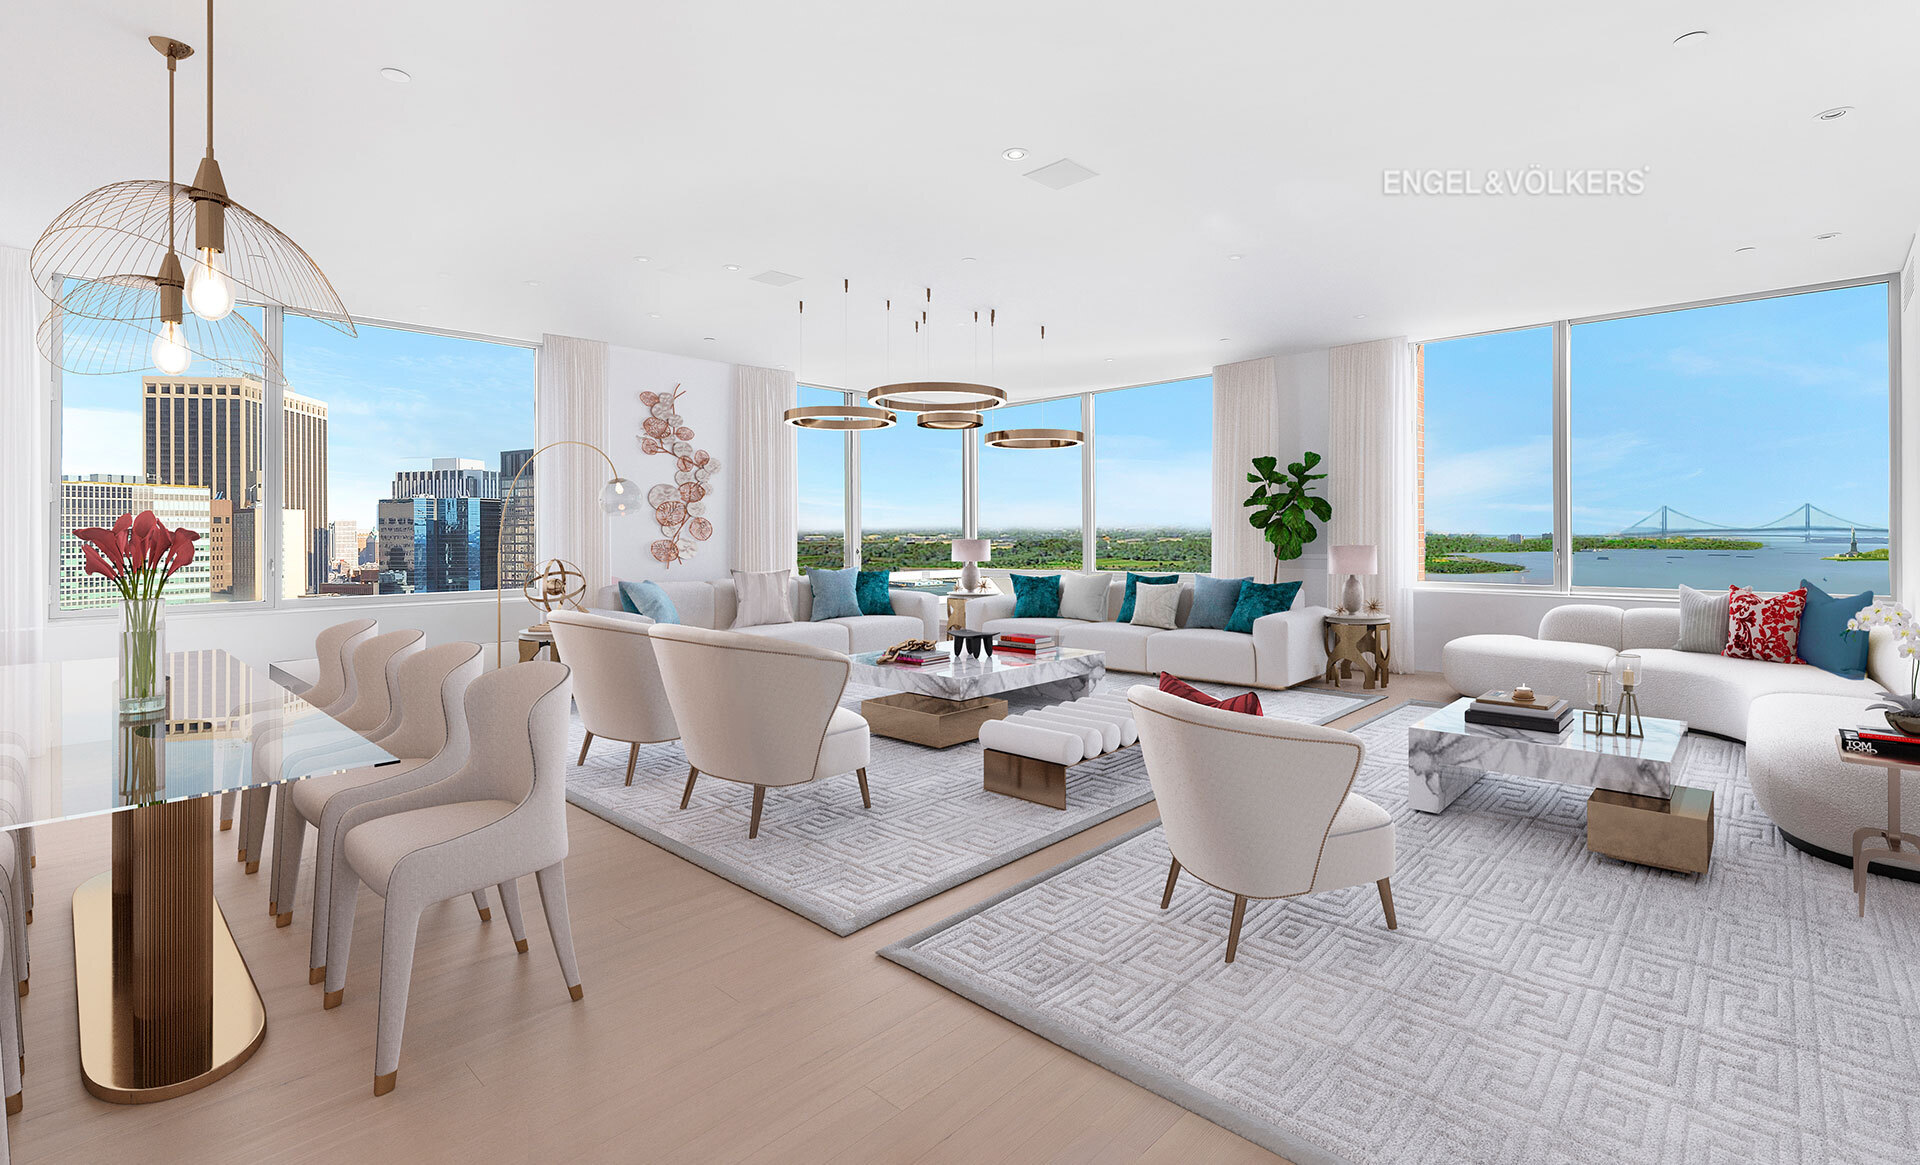 10 West Street Ph-38-Dupl, Battery Park City, Downtown, NYC - 8 Bedrooms  
7.5 Bathrooms  
13 Rooms - 